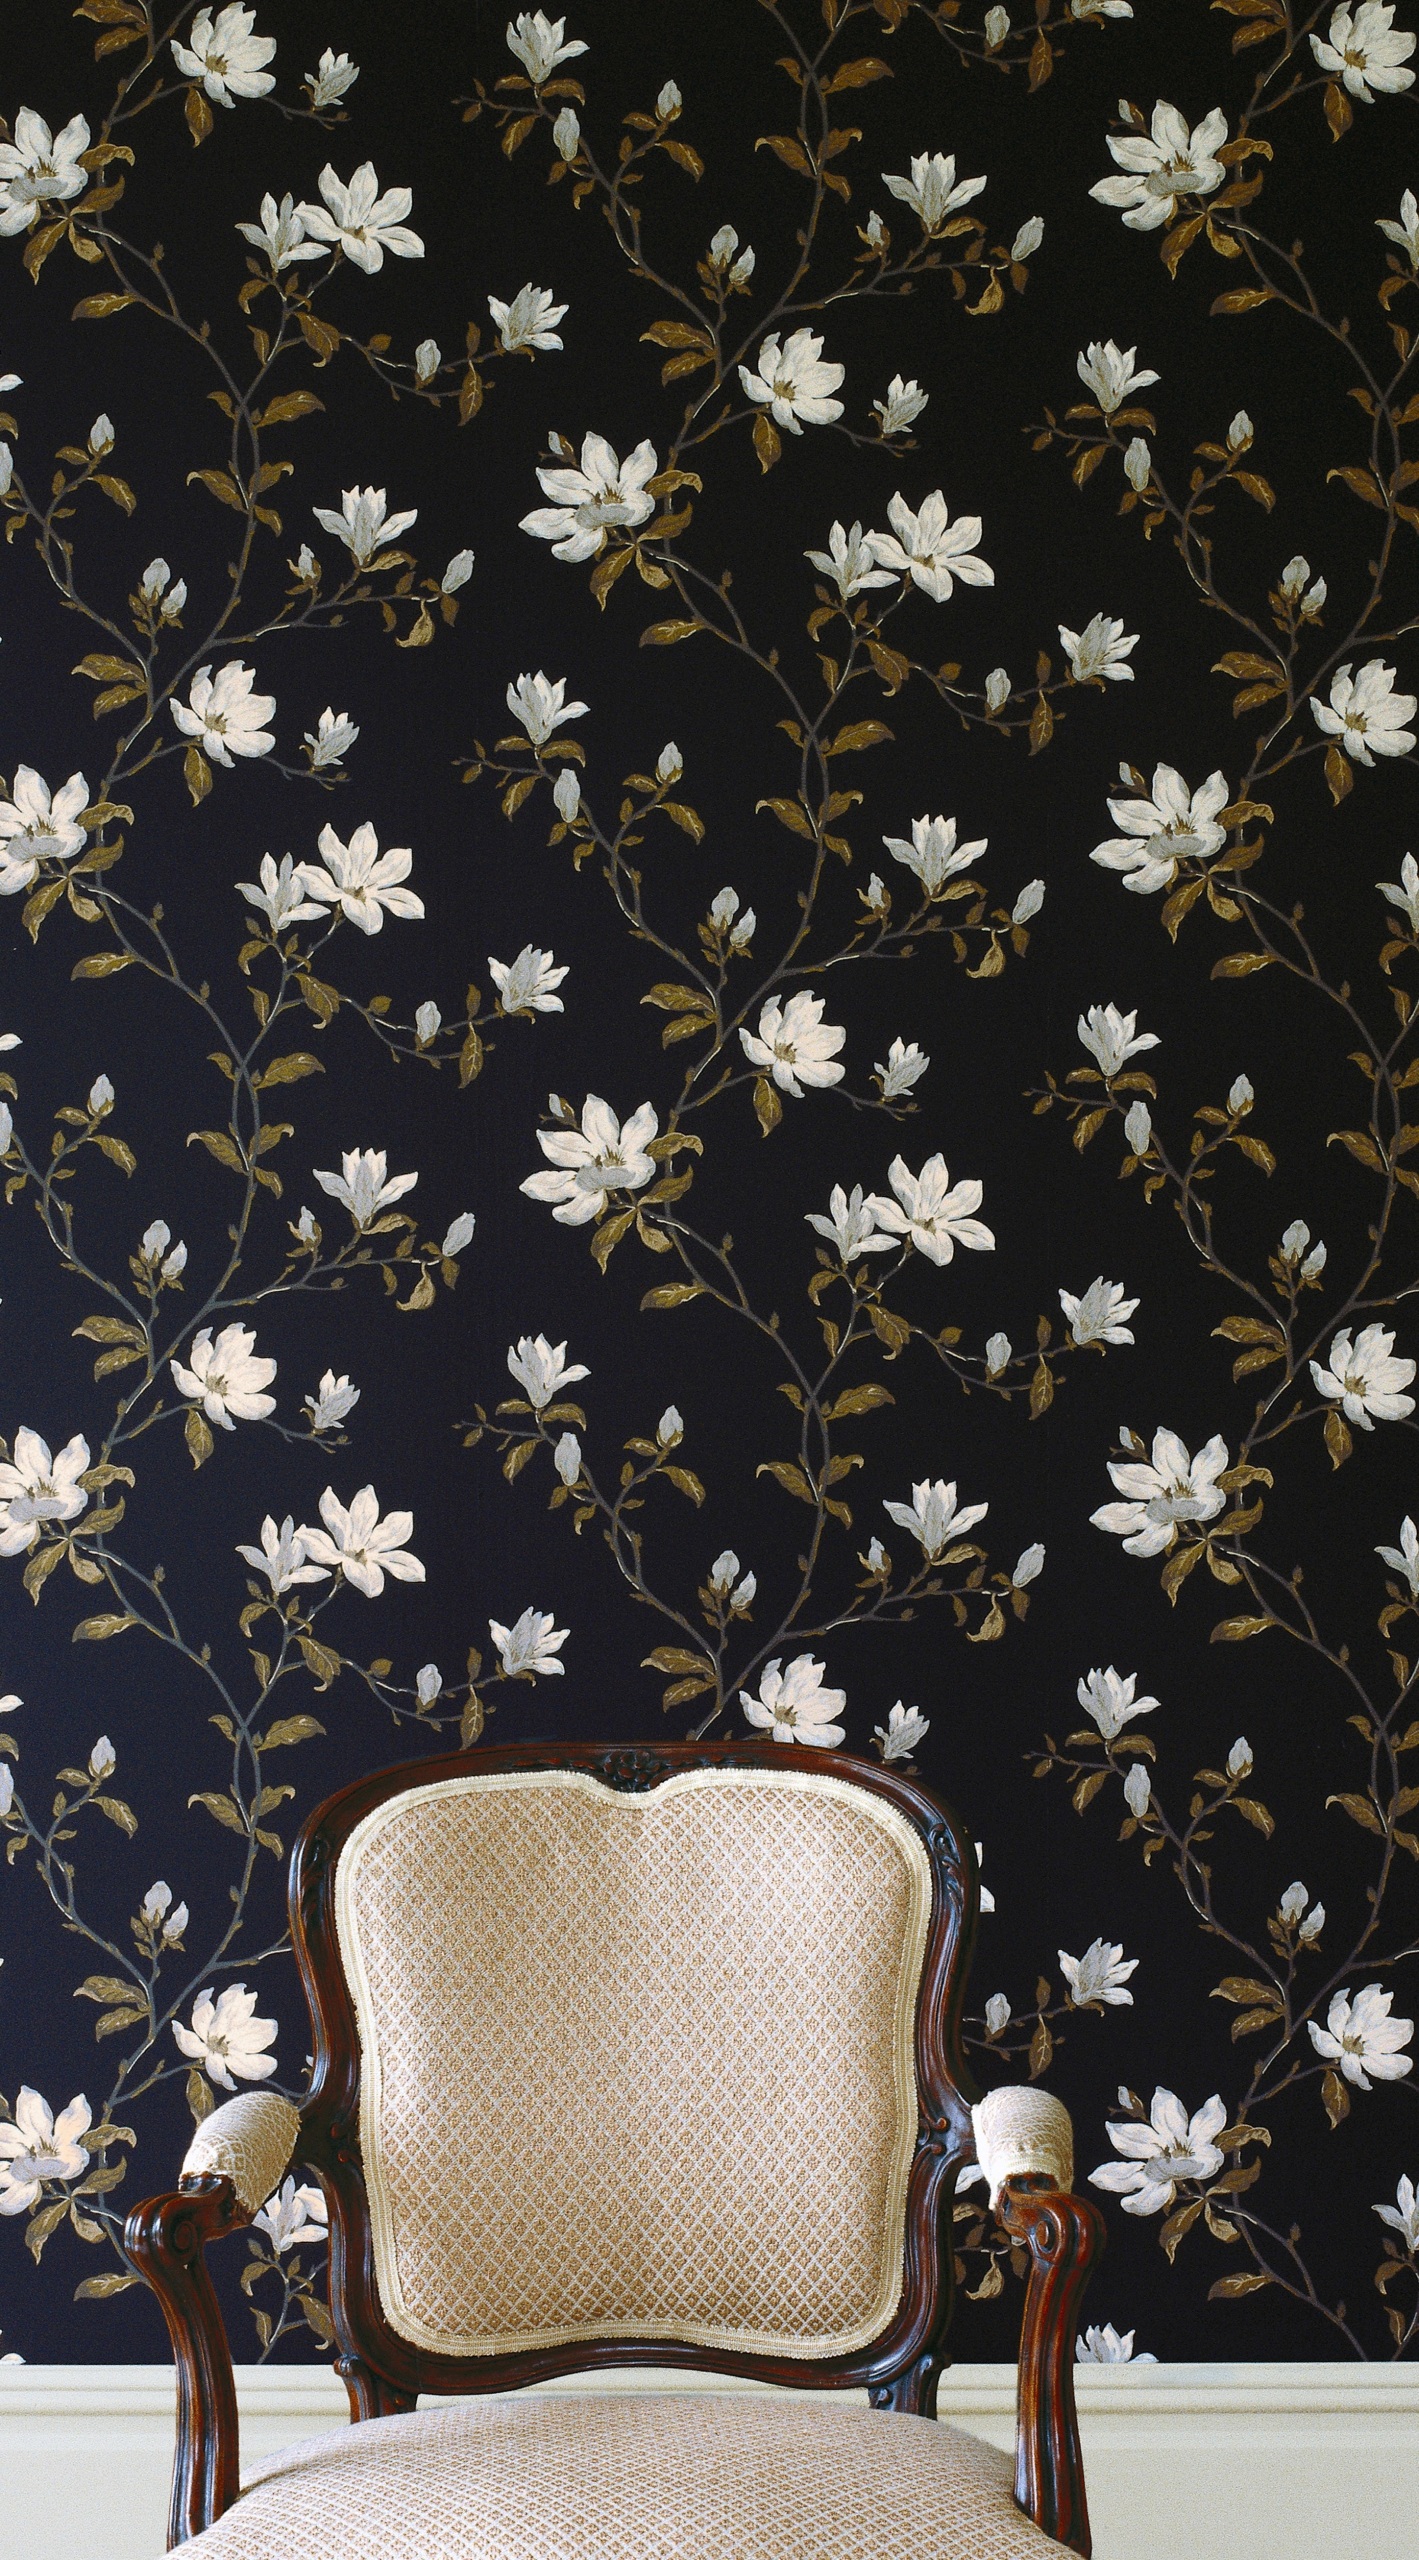 Free download Colefax Fowler Marchwood Wallpaper [1419x2560] for your ...